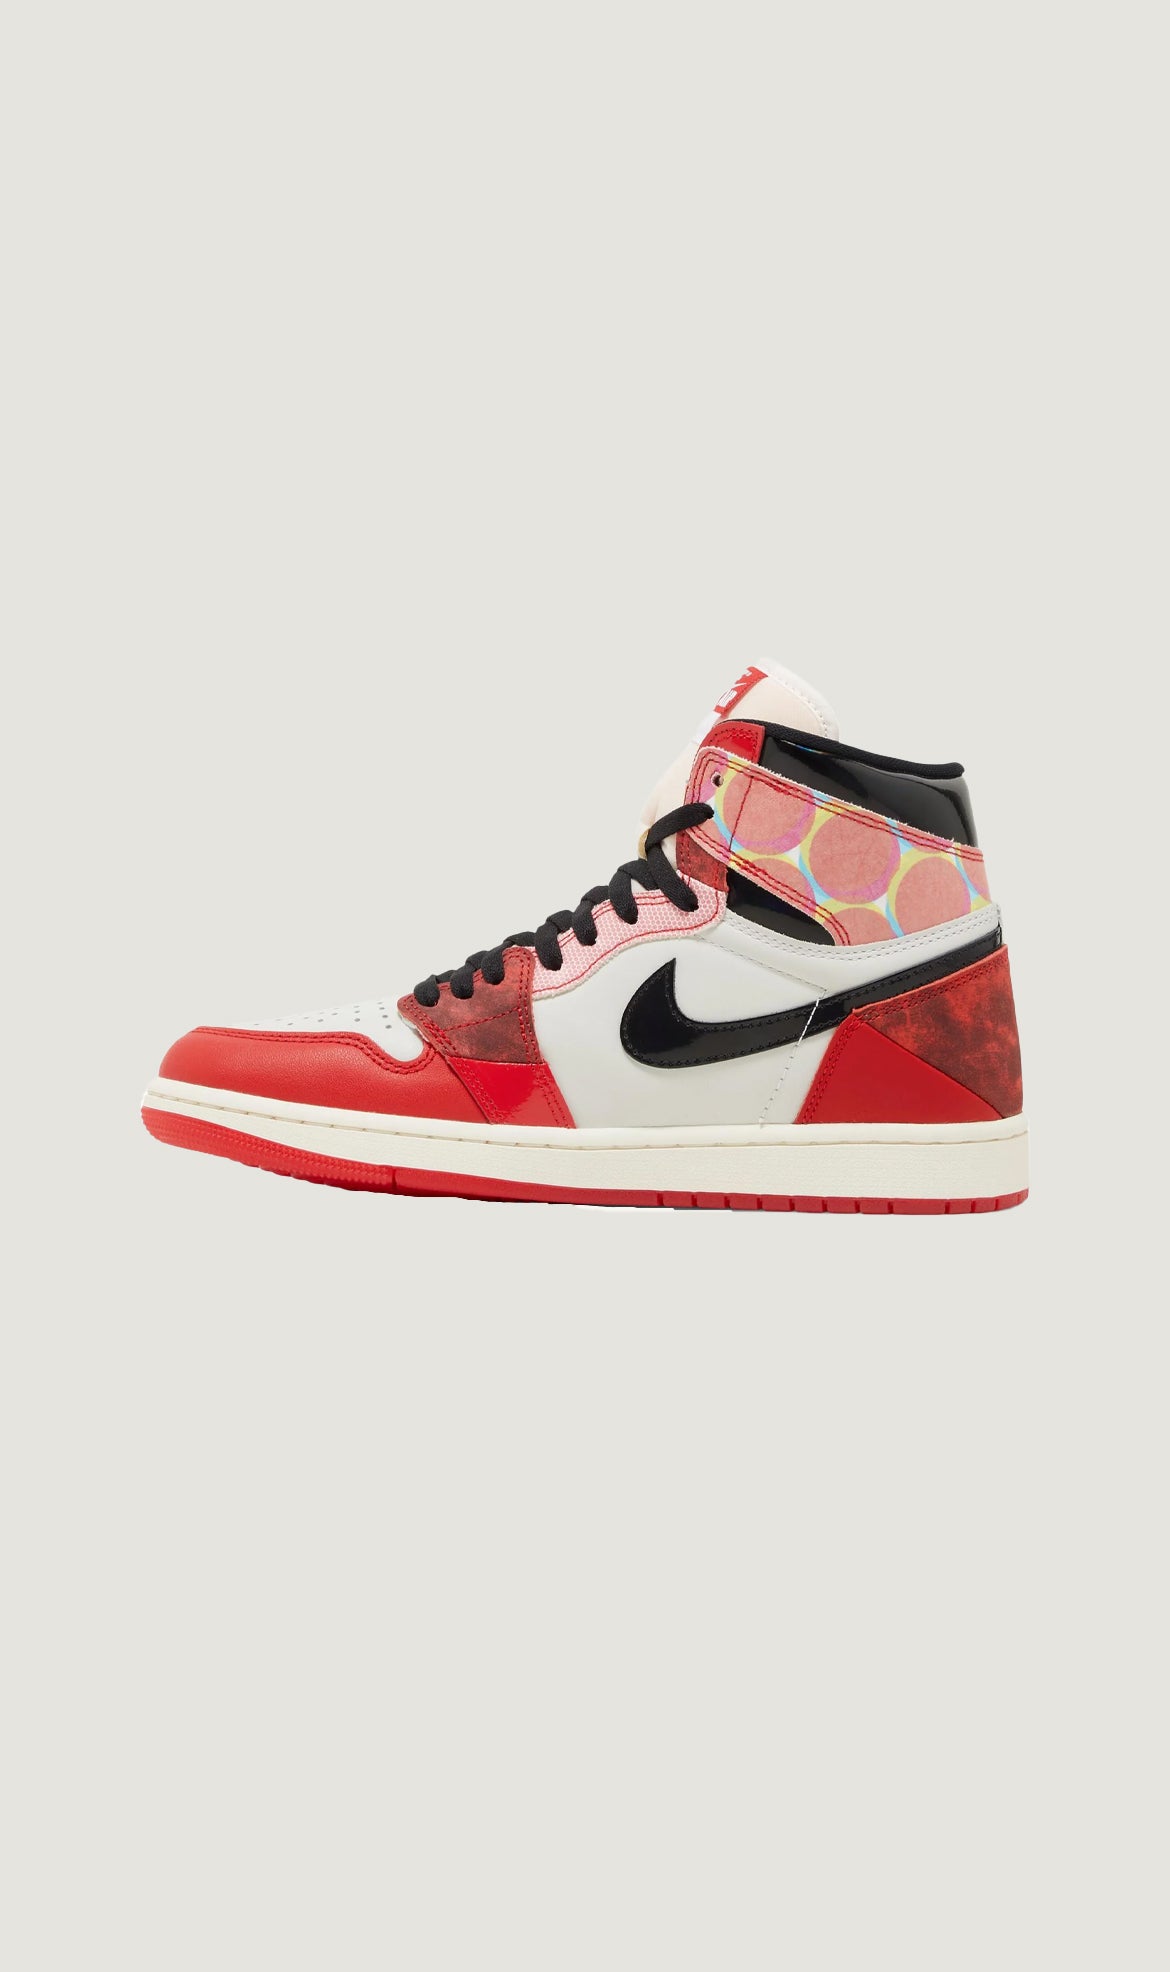 Load image into Gallery viewer, MARVEL X AIR JORDAN 1 RETRO HIGH OG - NEXT CHAPTER
